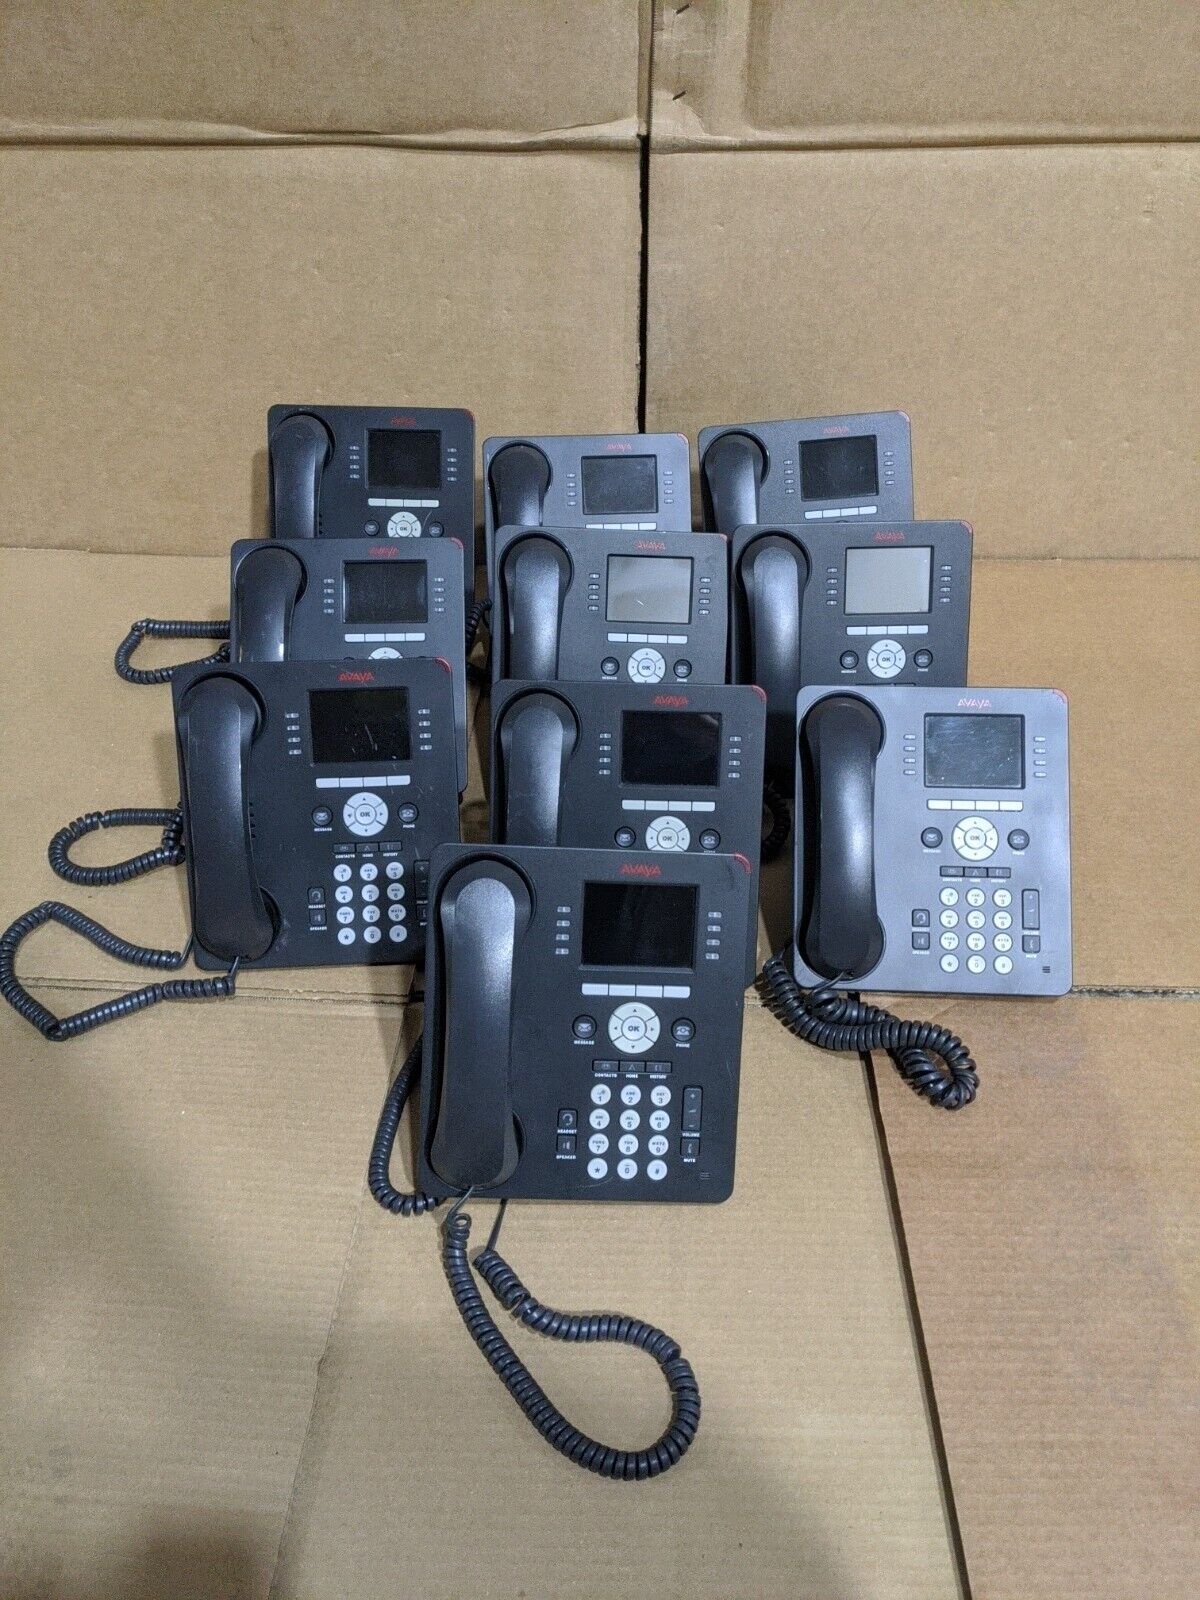 Lot of 10 Avaya 9611G 8-Line Internet Office IP Phone with Stand and Handset